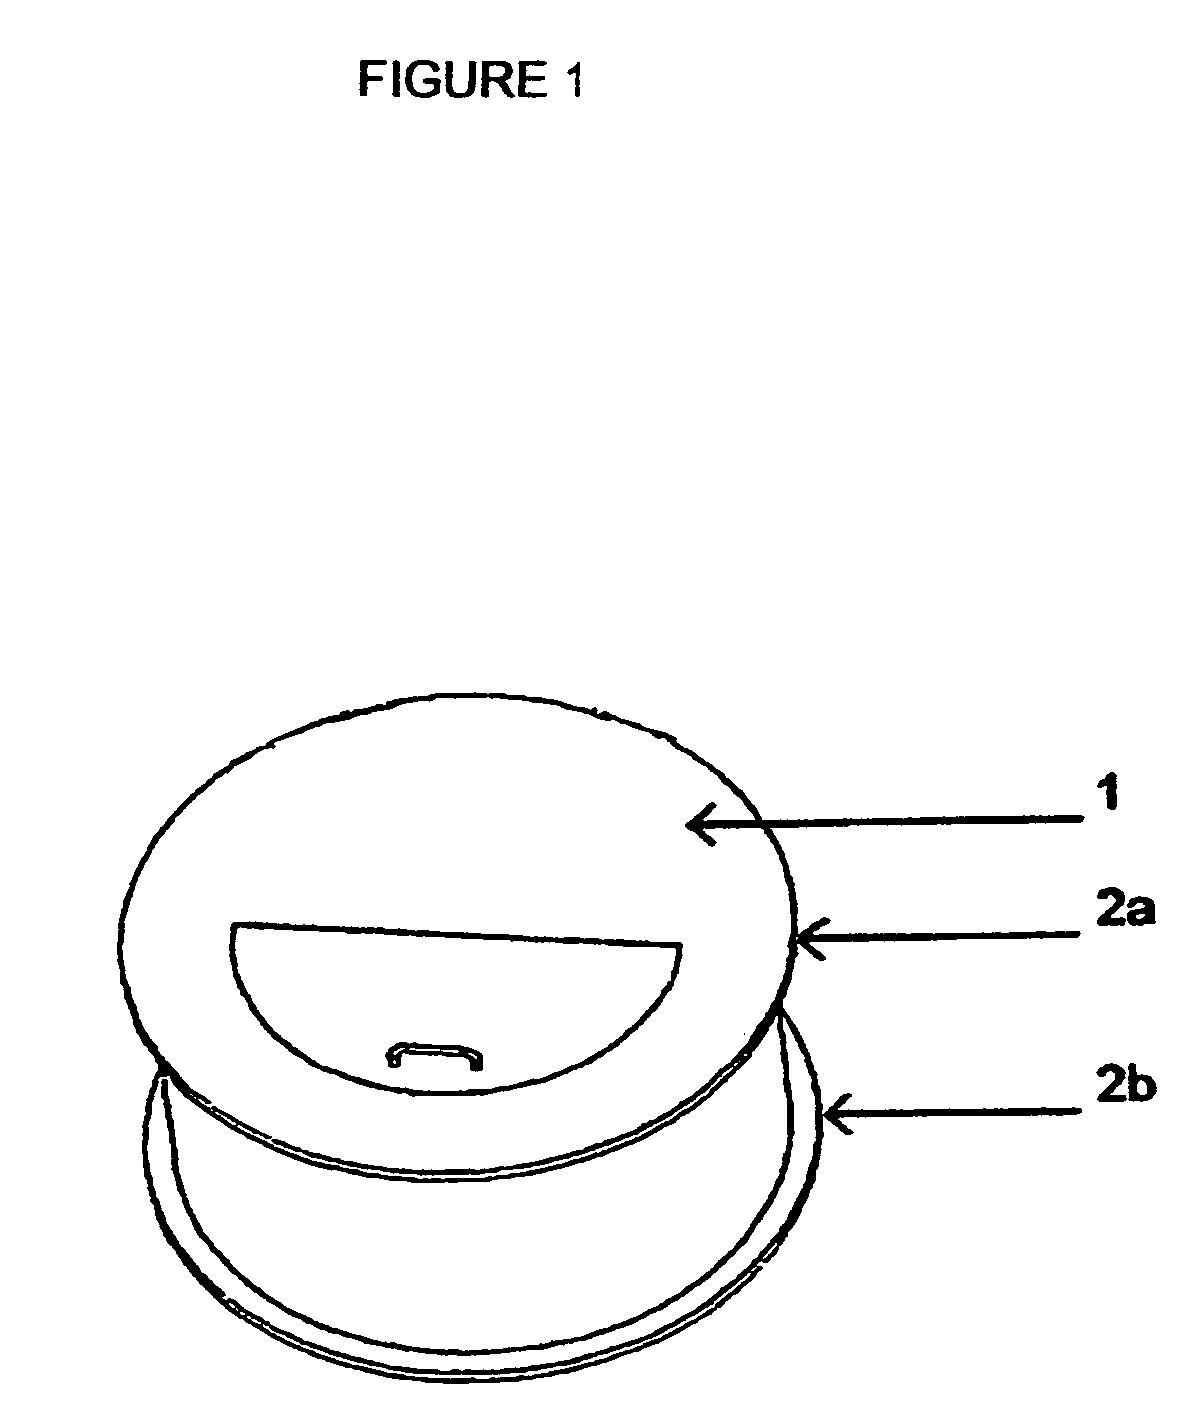 Snorkel apparatus and methods of use